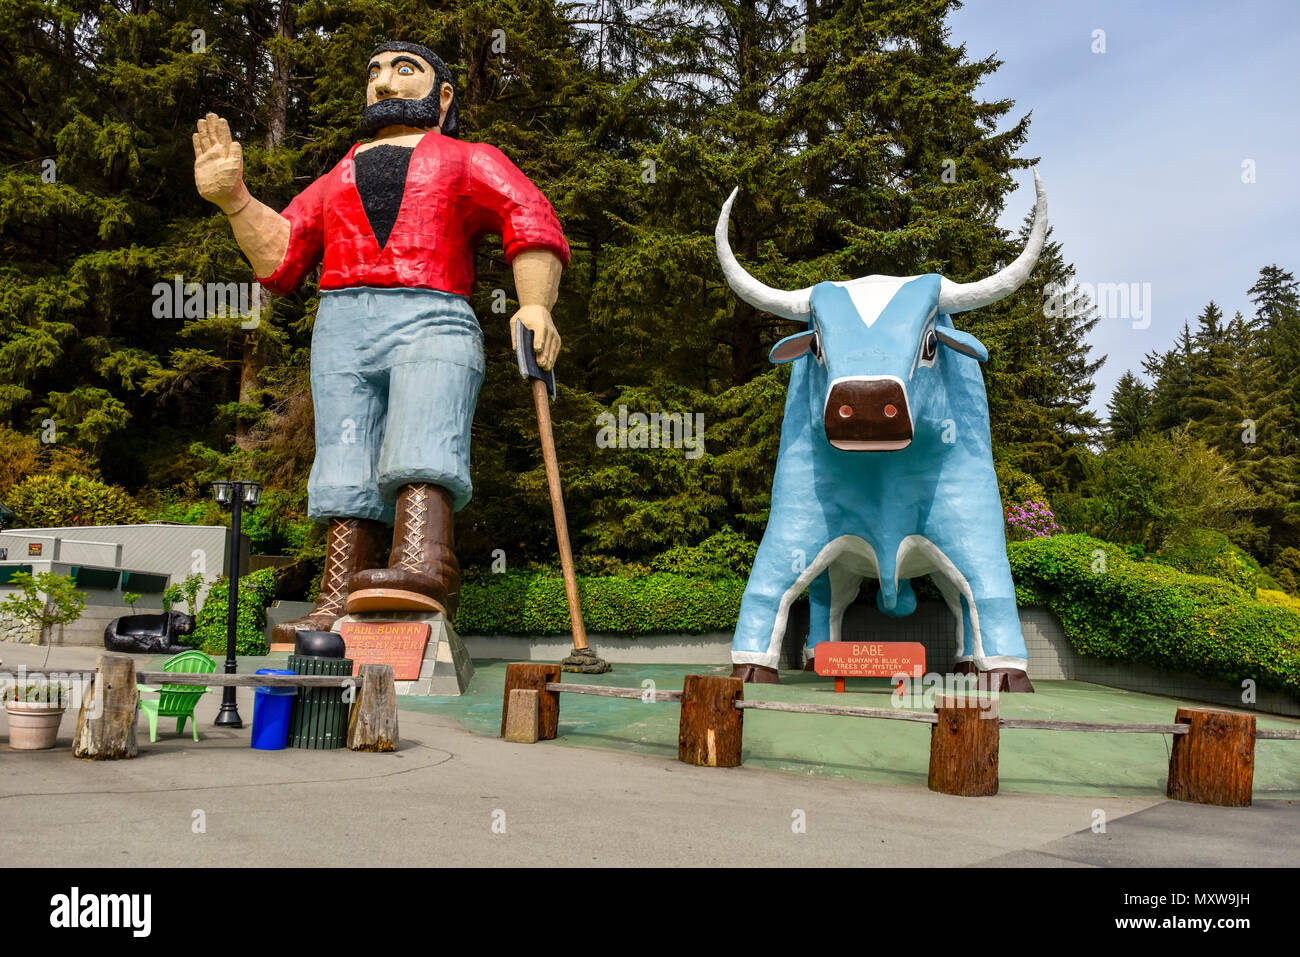 The Trees of Mystery, A roadside attraction in Klamath, California. Paul Bunyan and his Blue Ox 'Babe' stands almost 50 feet high & talks to passersby. Stock Photo